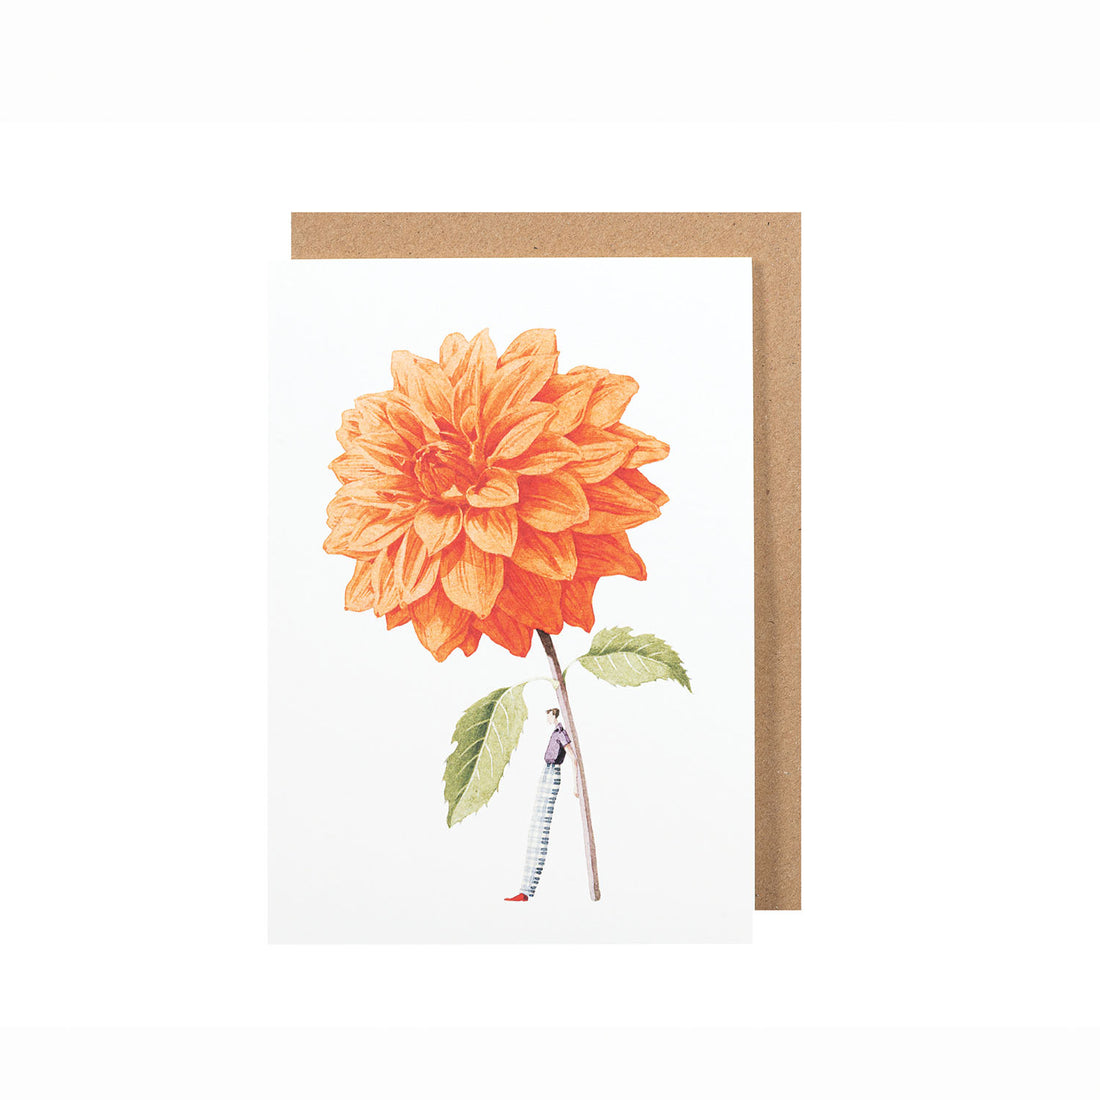 A Orange Dahlia Greeting Card with a flower on it by Hester &amp; Cook.